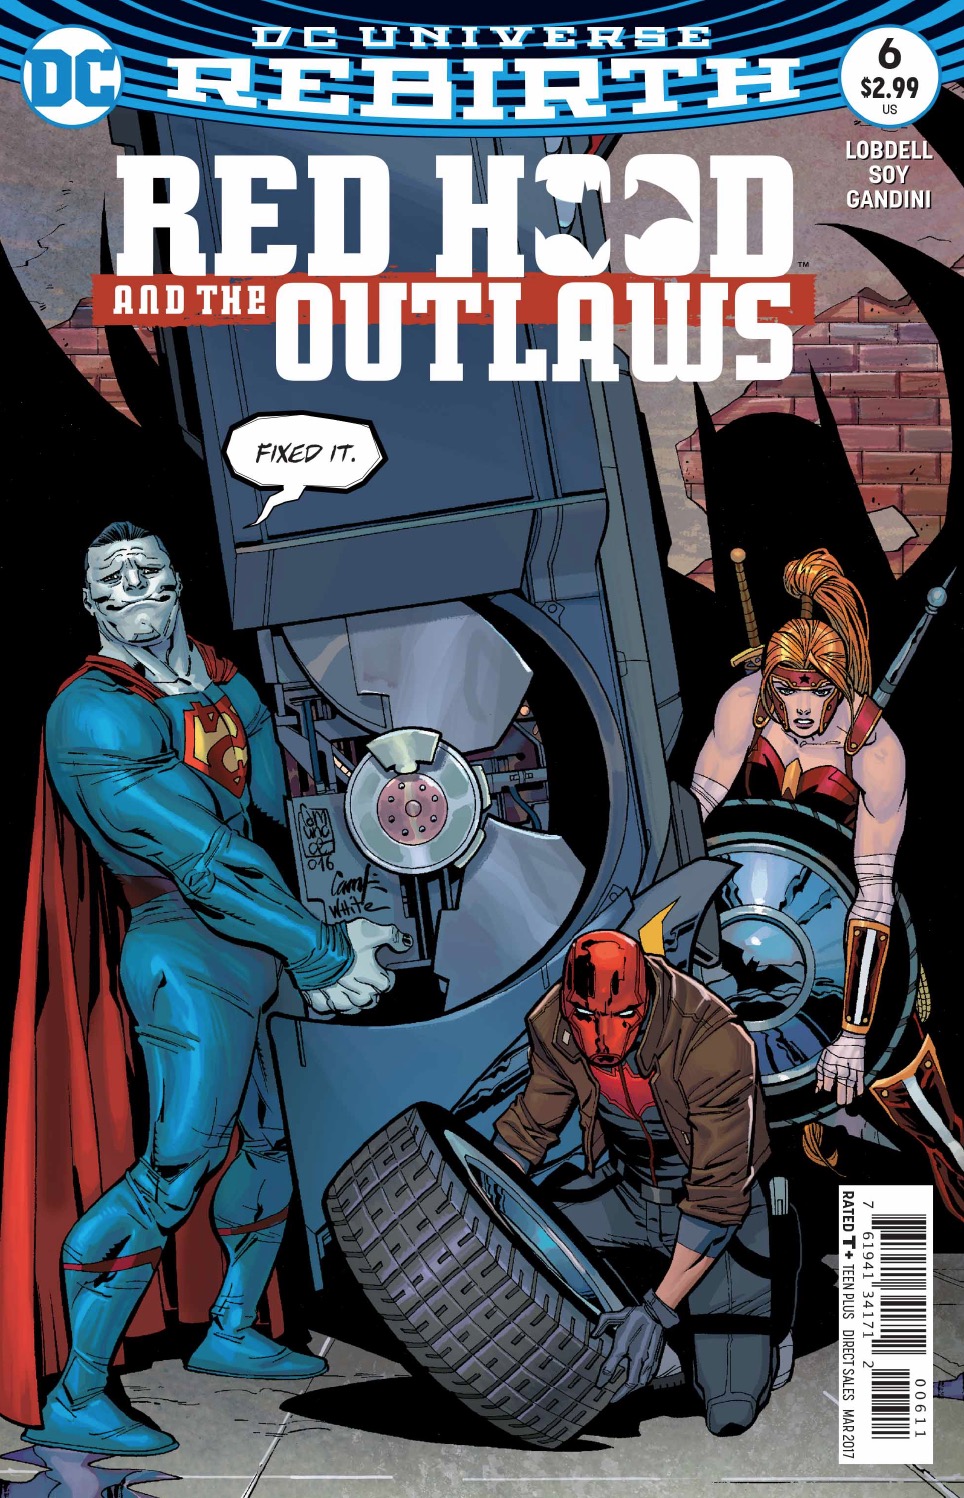 Red Hood and the Outlaws #6 Review